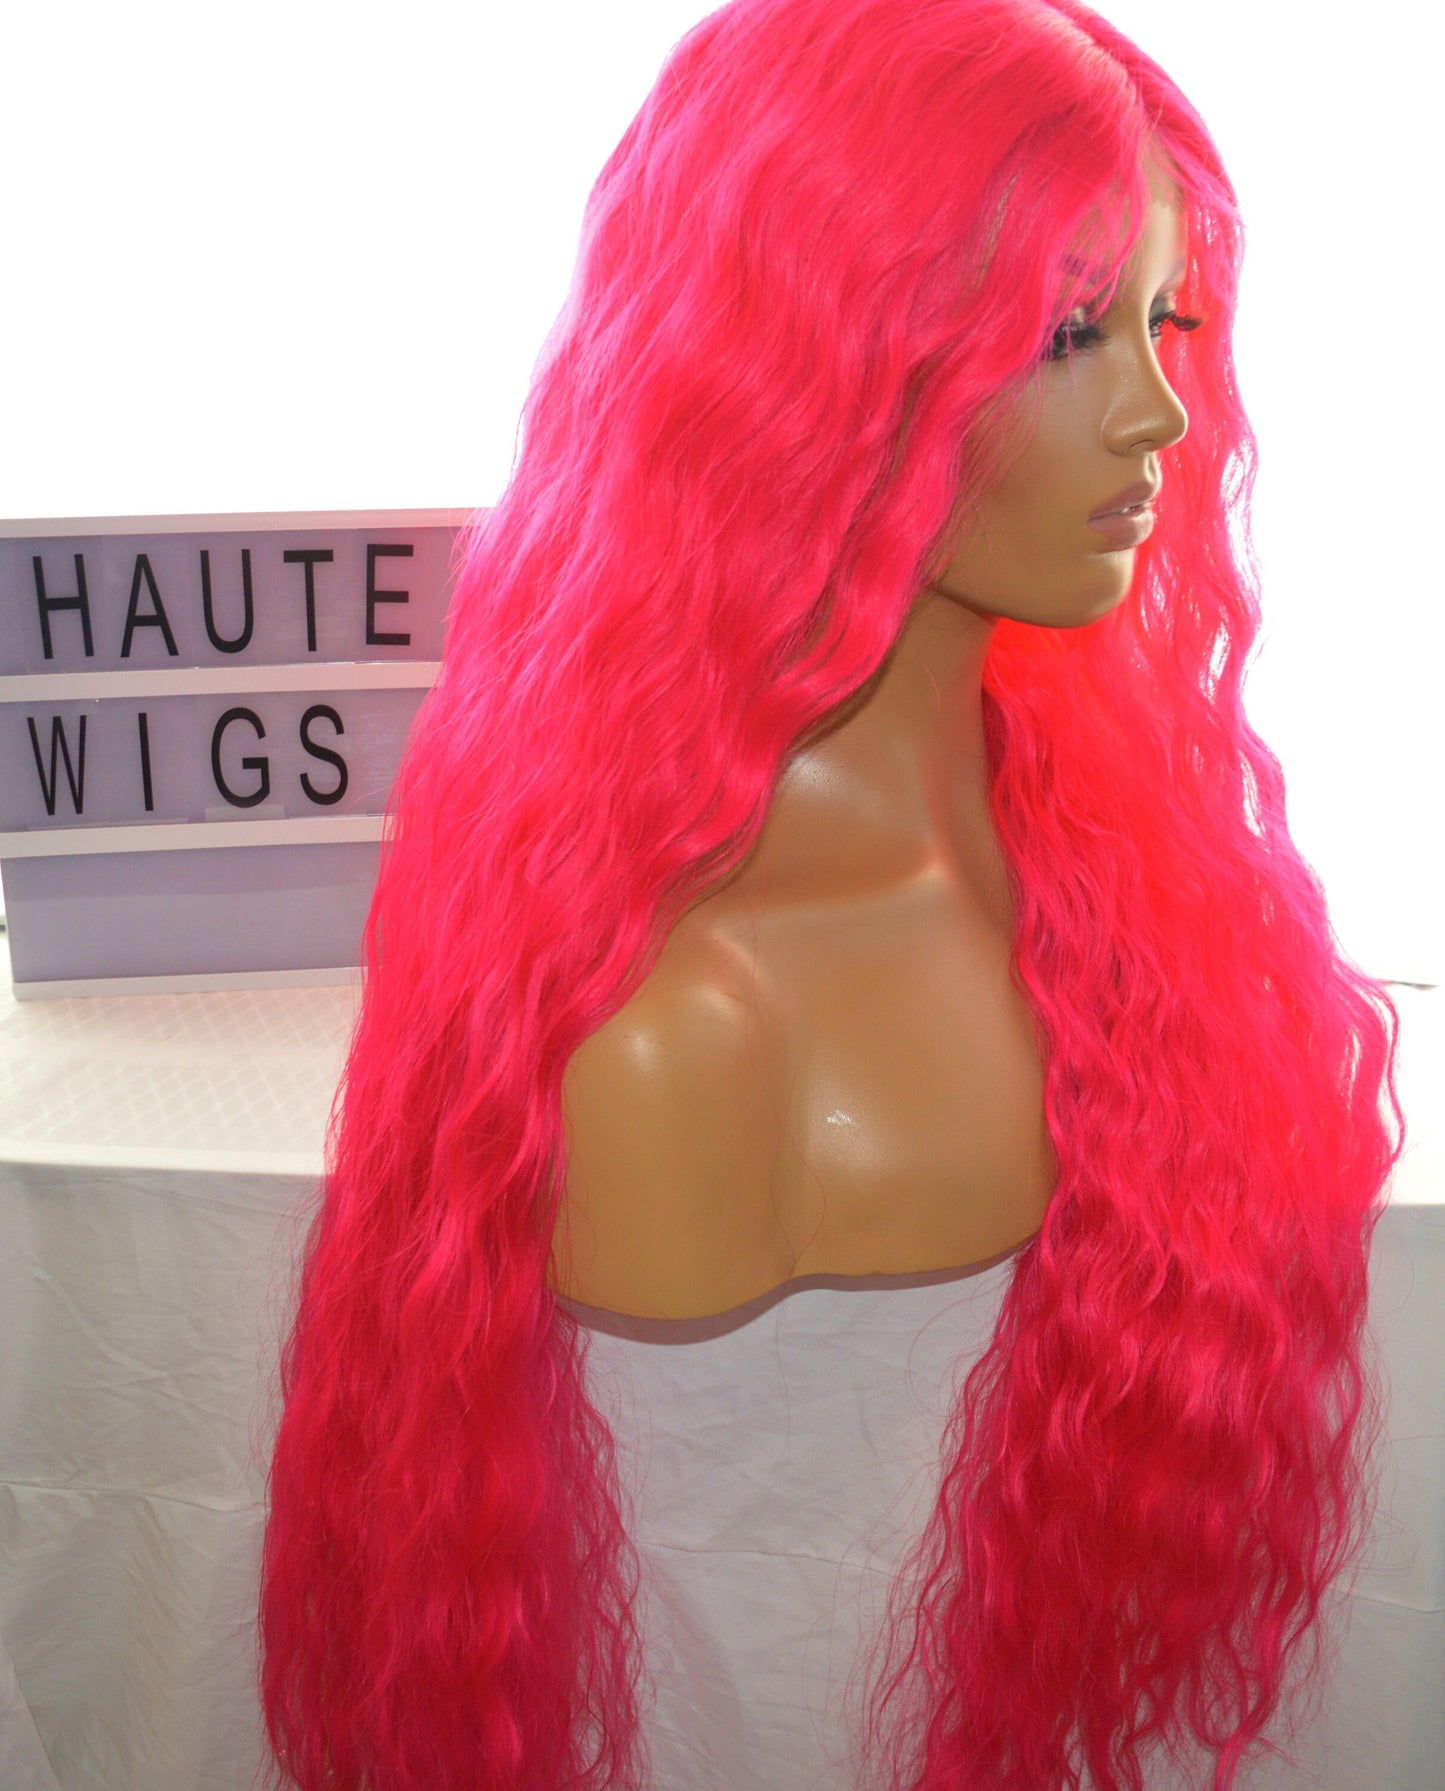 NEON ELECTRIC Pink Wavy XXX Long 42 Inches Lace Front Wig Deep Rich Fuchsia Pink Stunning Human Hair Curly Center Parting Baby Hairs